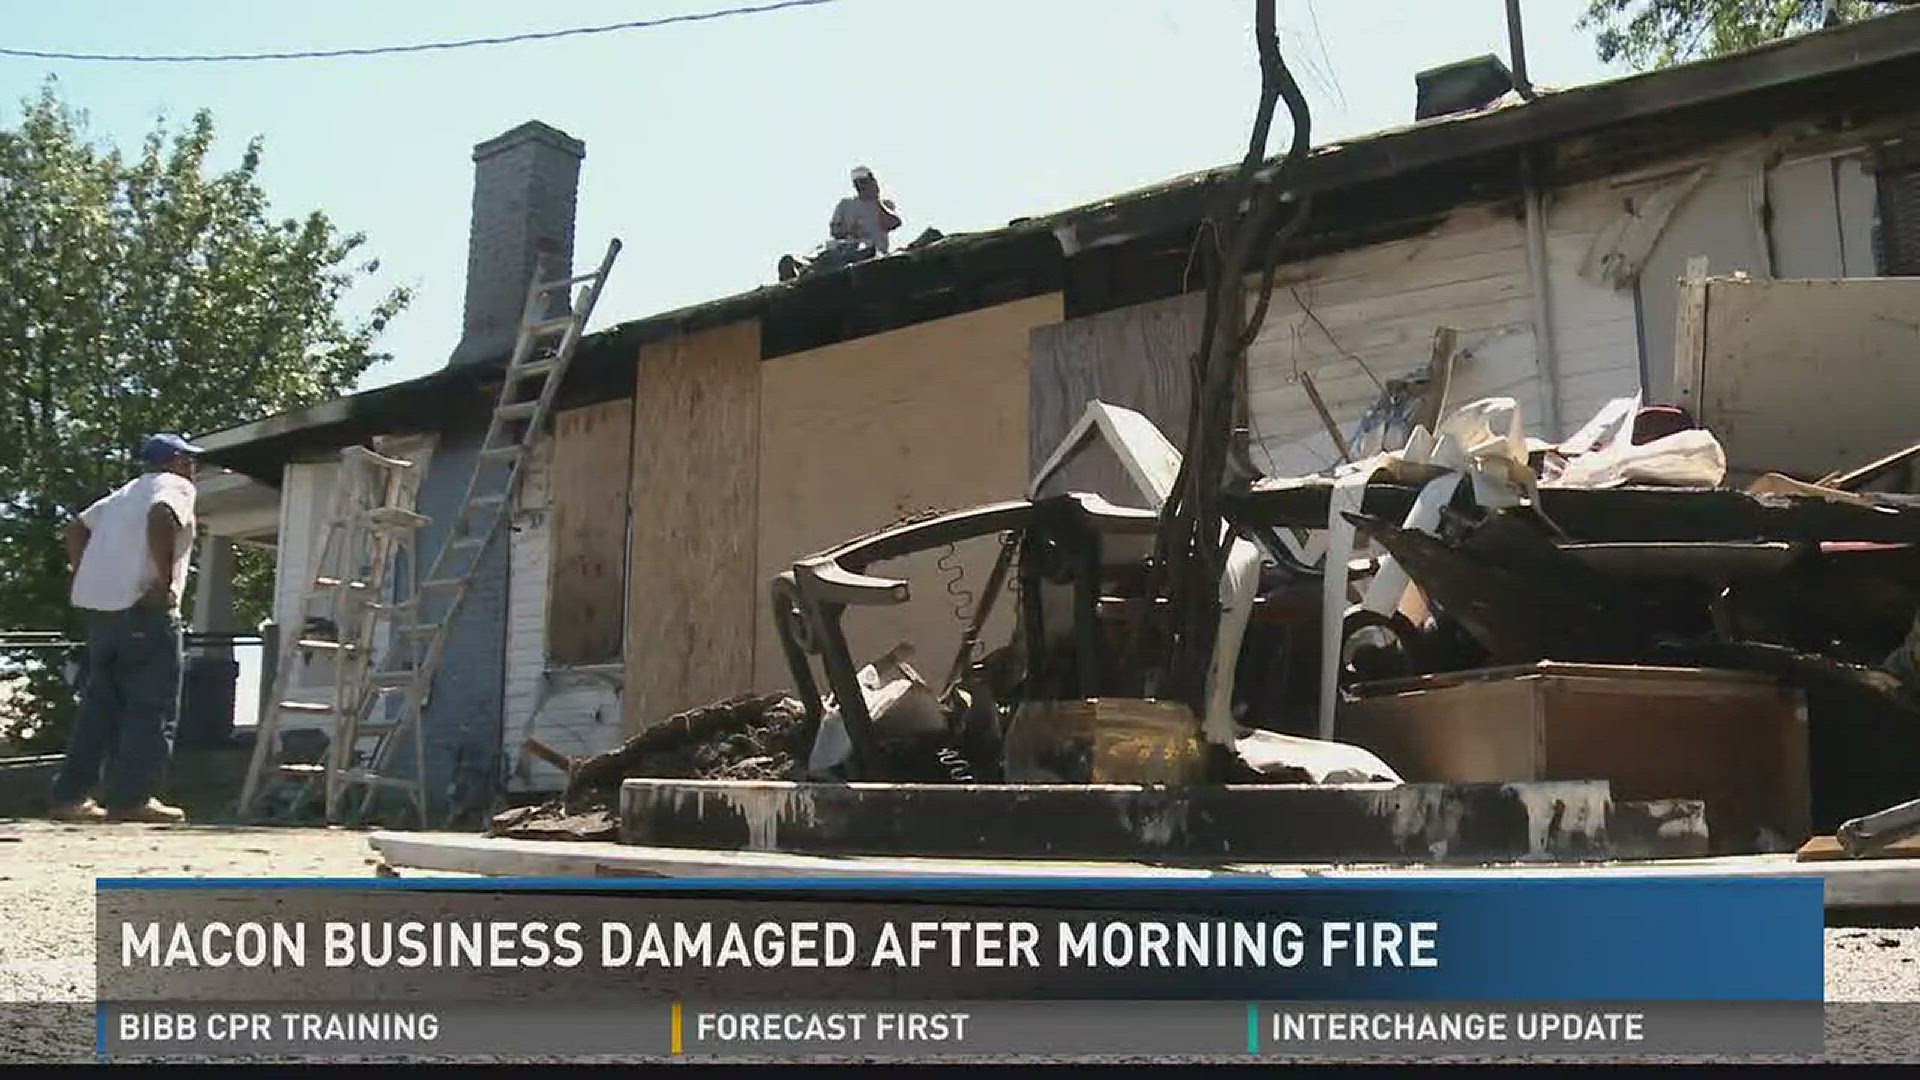 Macon business damaged after morning fire